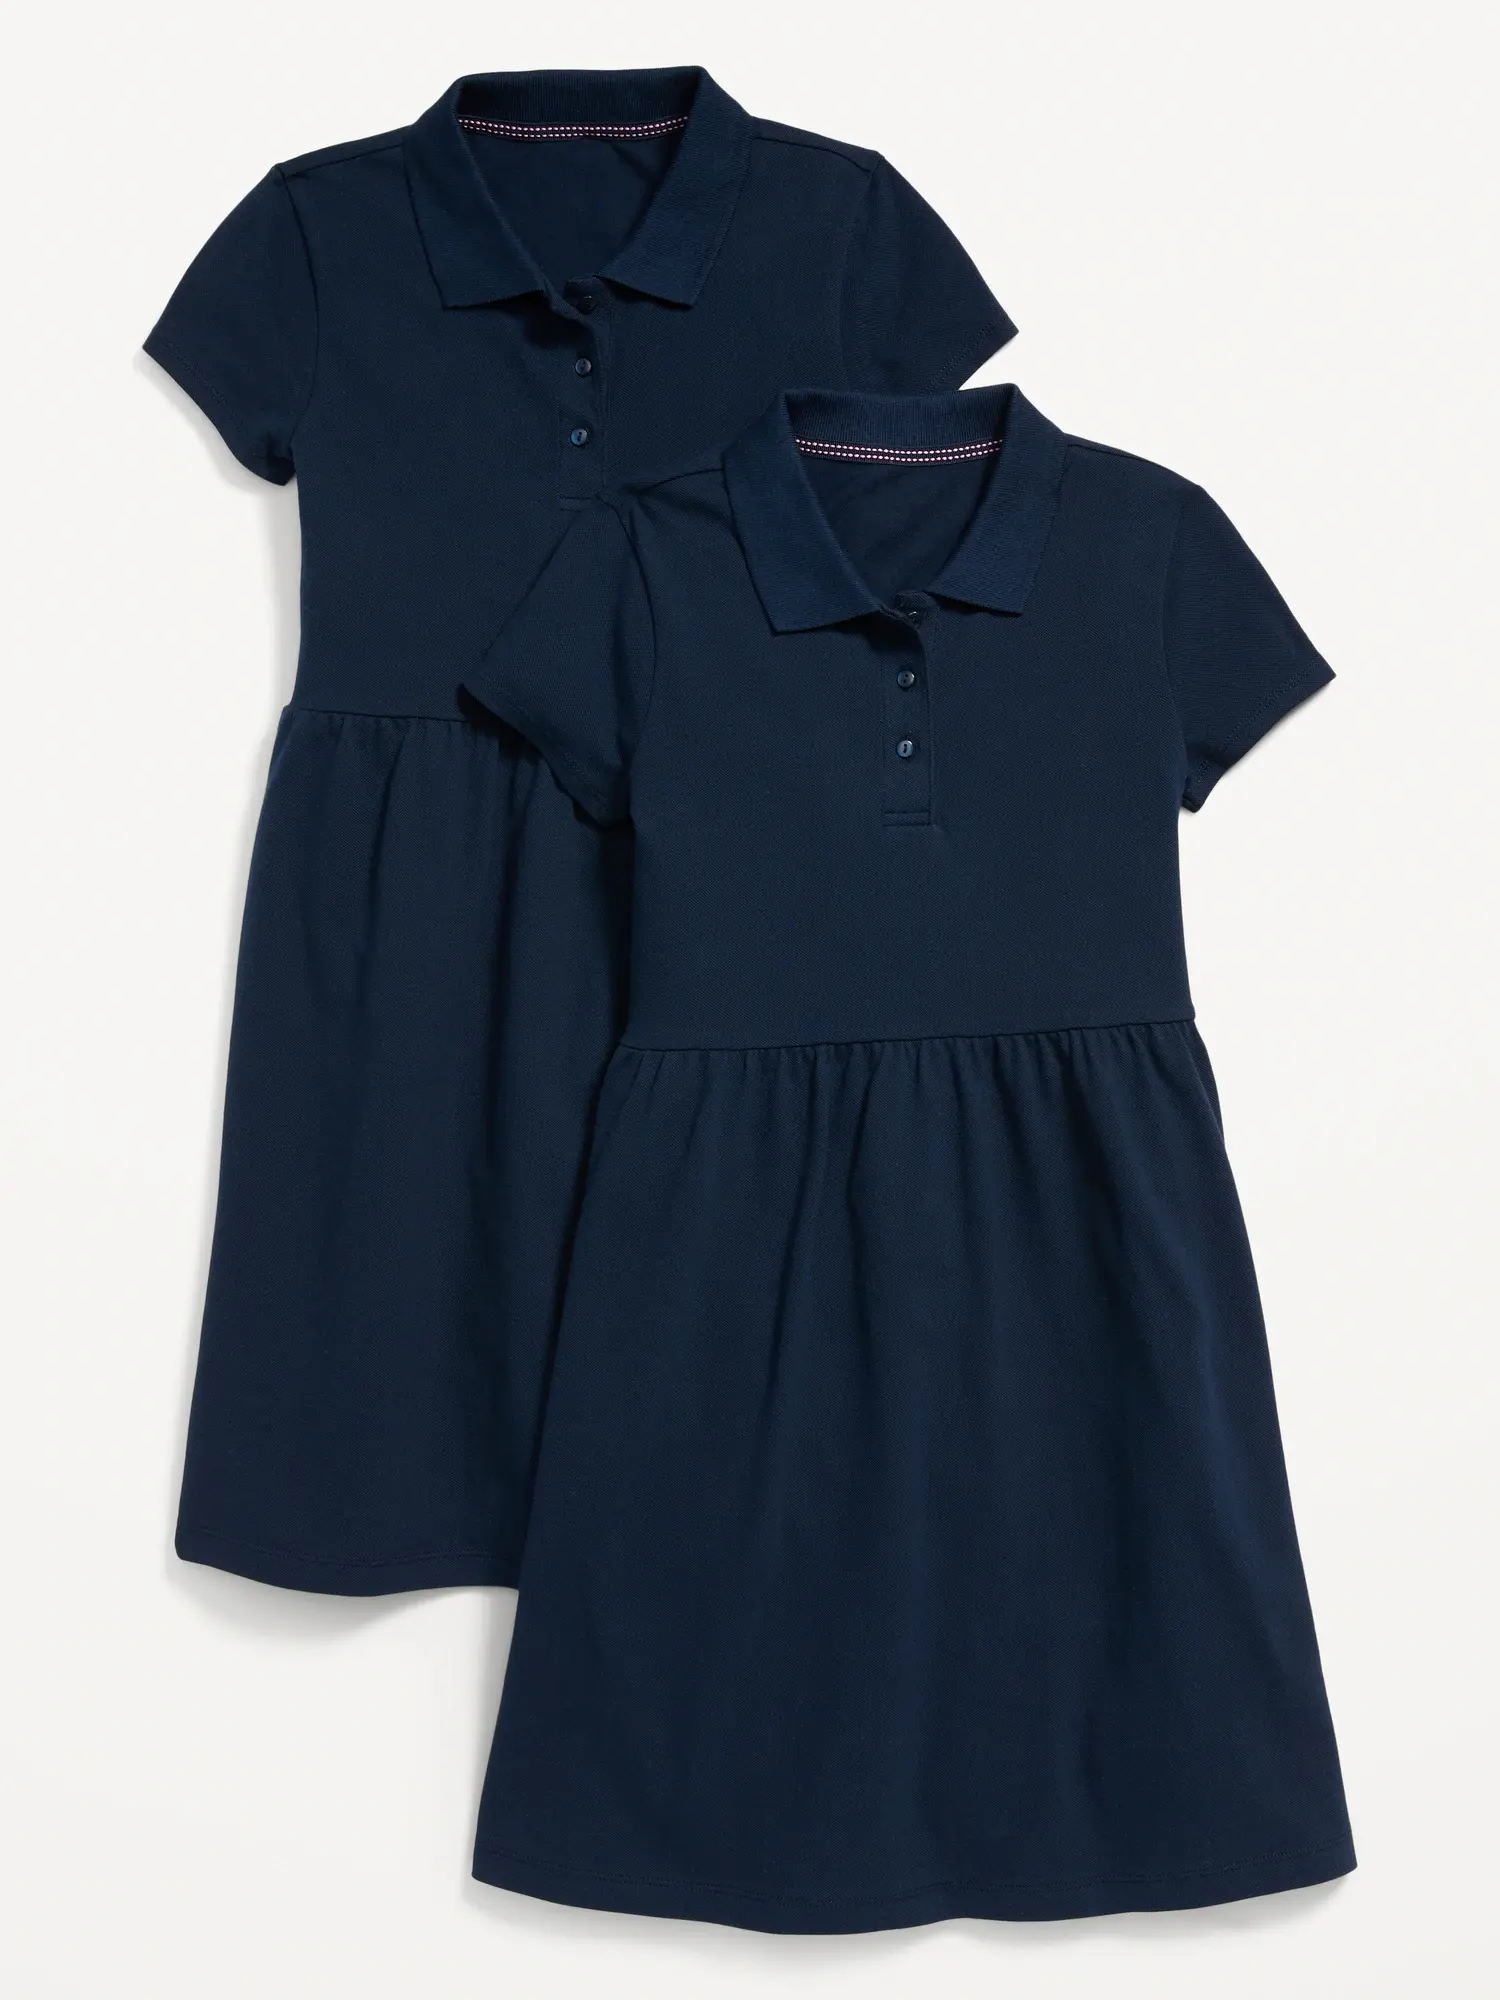 Old Navy School Uniform Fit & Flare Pique Polo Dress 2-Pack for Girls blue. 1